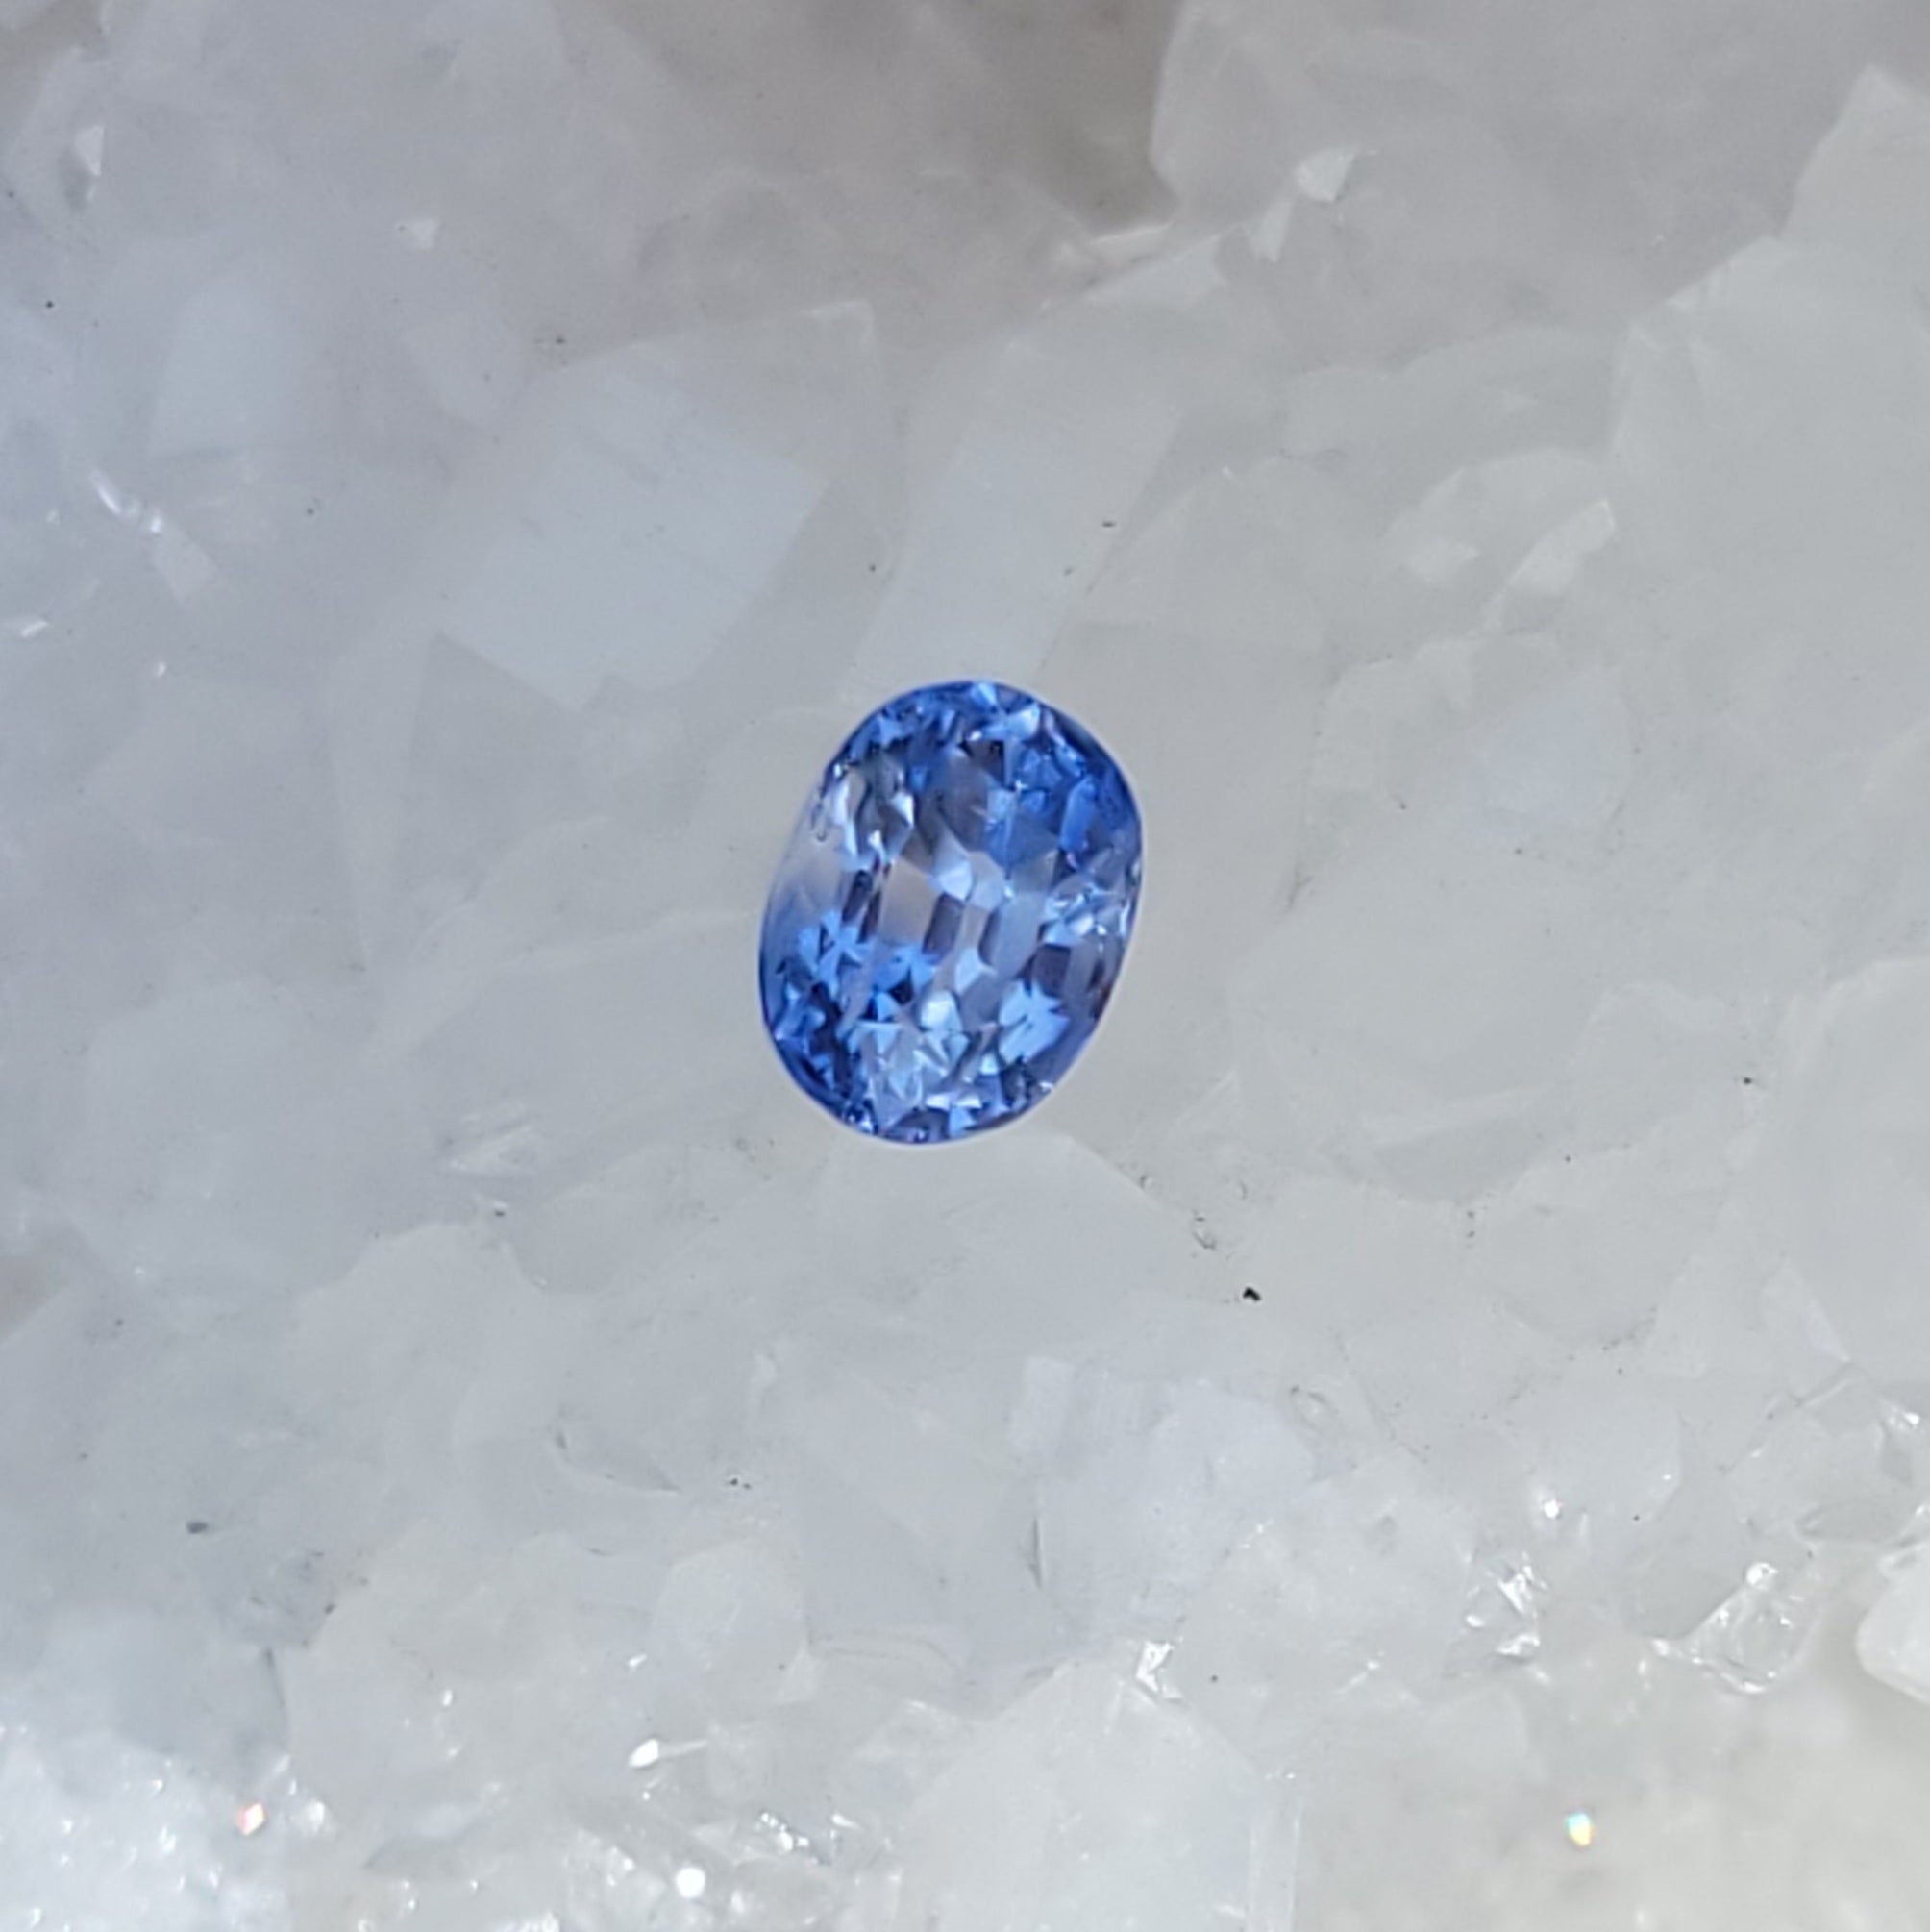 Sri Lankan Sapphire 1.96 CT Violet, Periwinkle, Gray, Silver, White, Clear Oval Cut